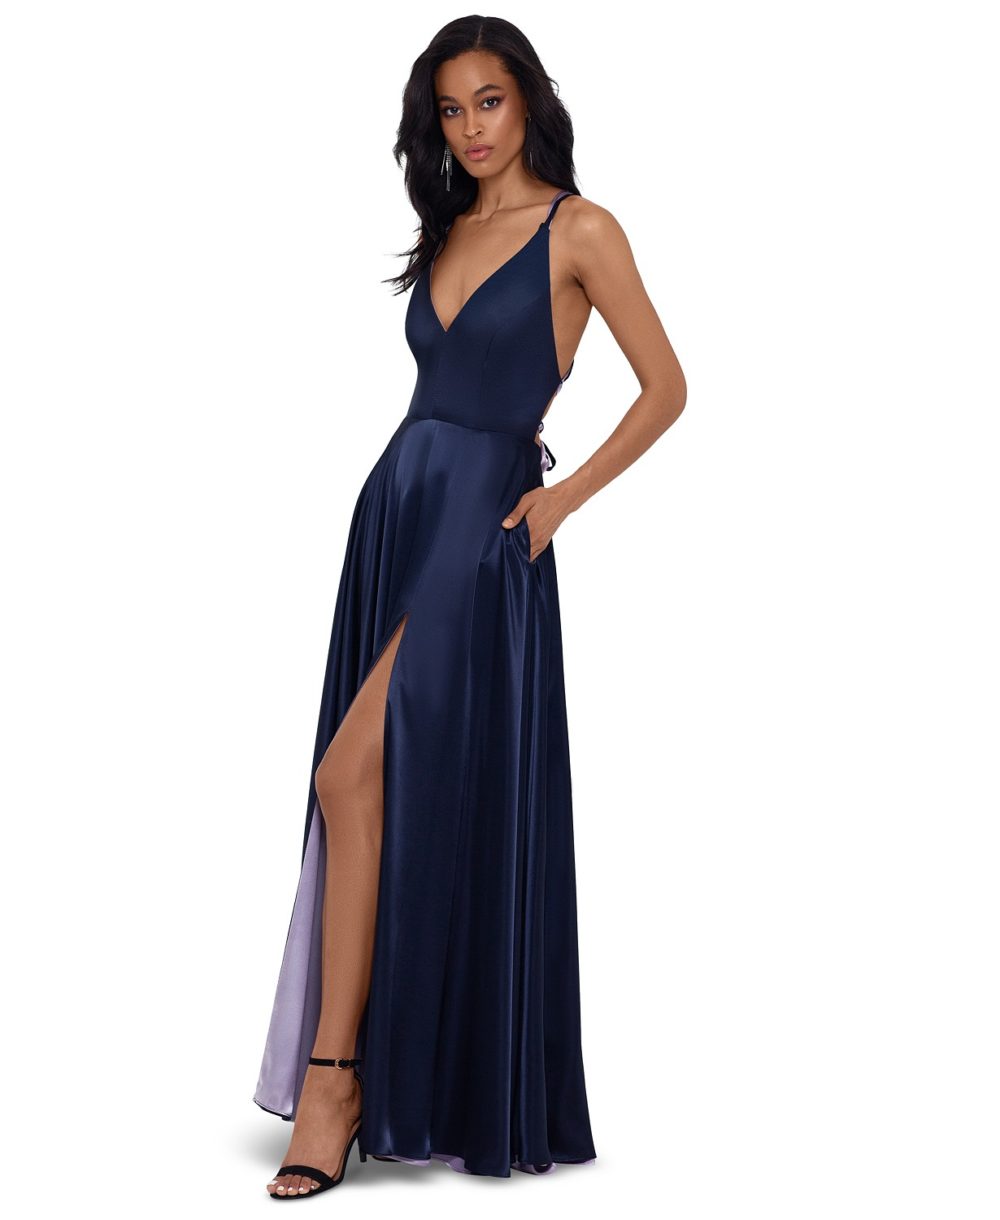 woocommerce-673321-2209615.cloudwaysapps.com-betsy-amp-adam-womens-tricolor-tie-back-satin-gown-dress